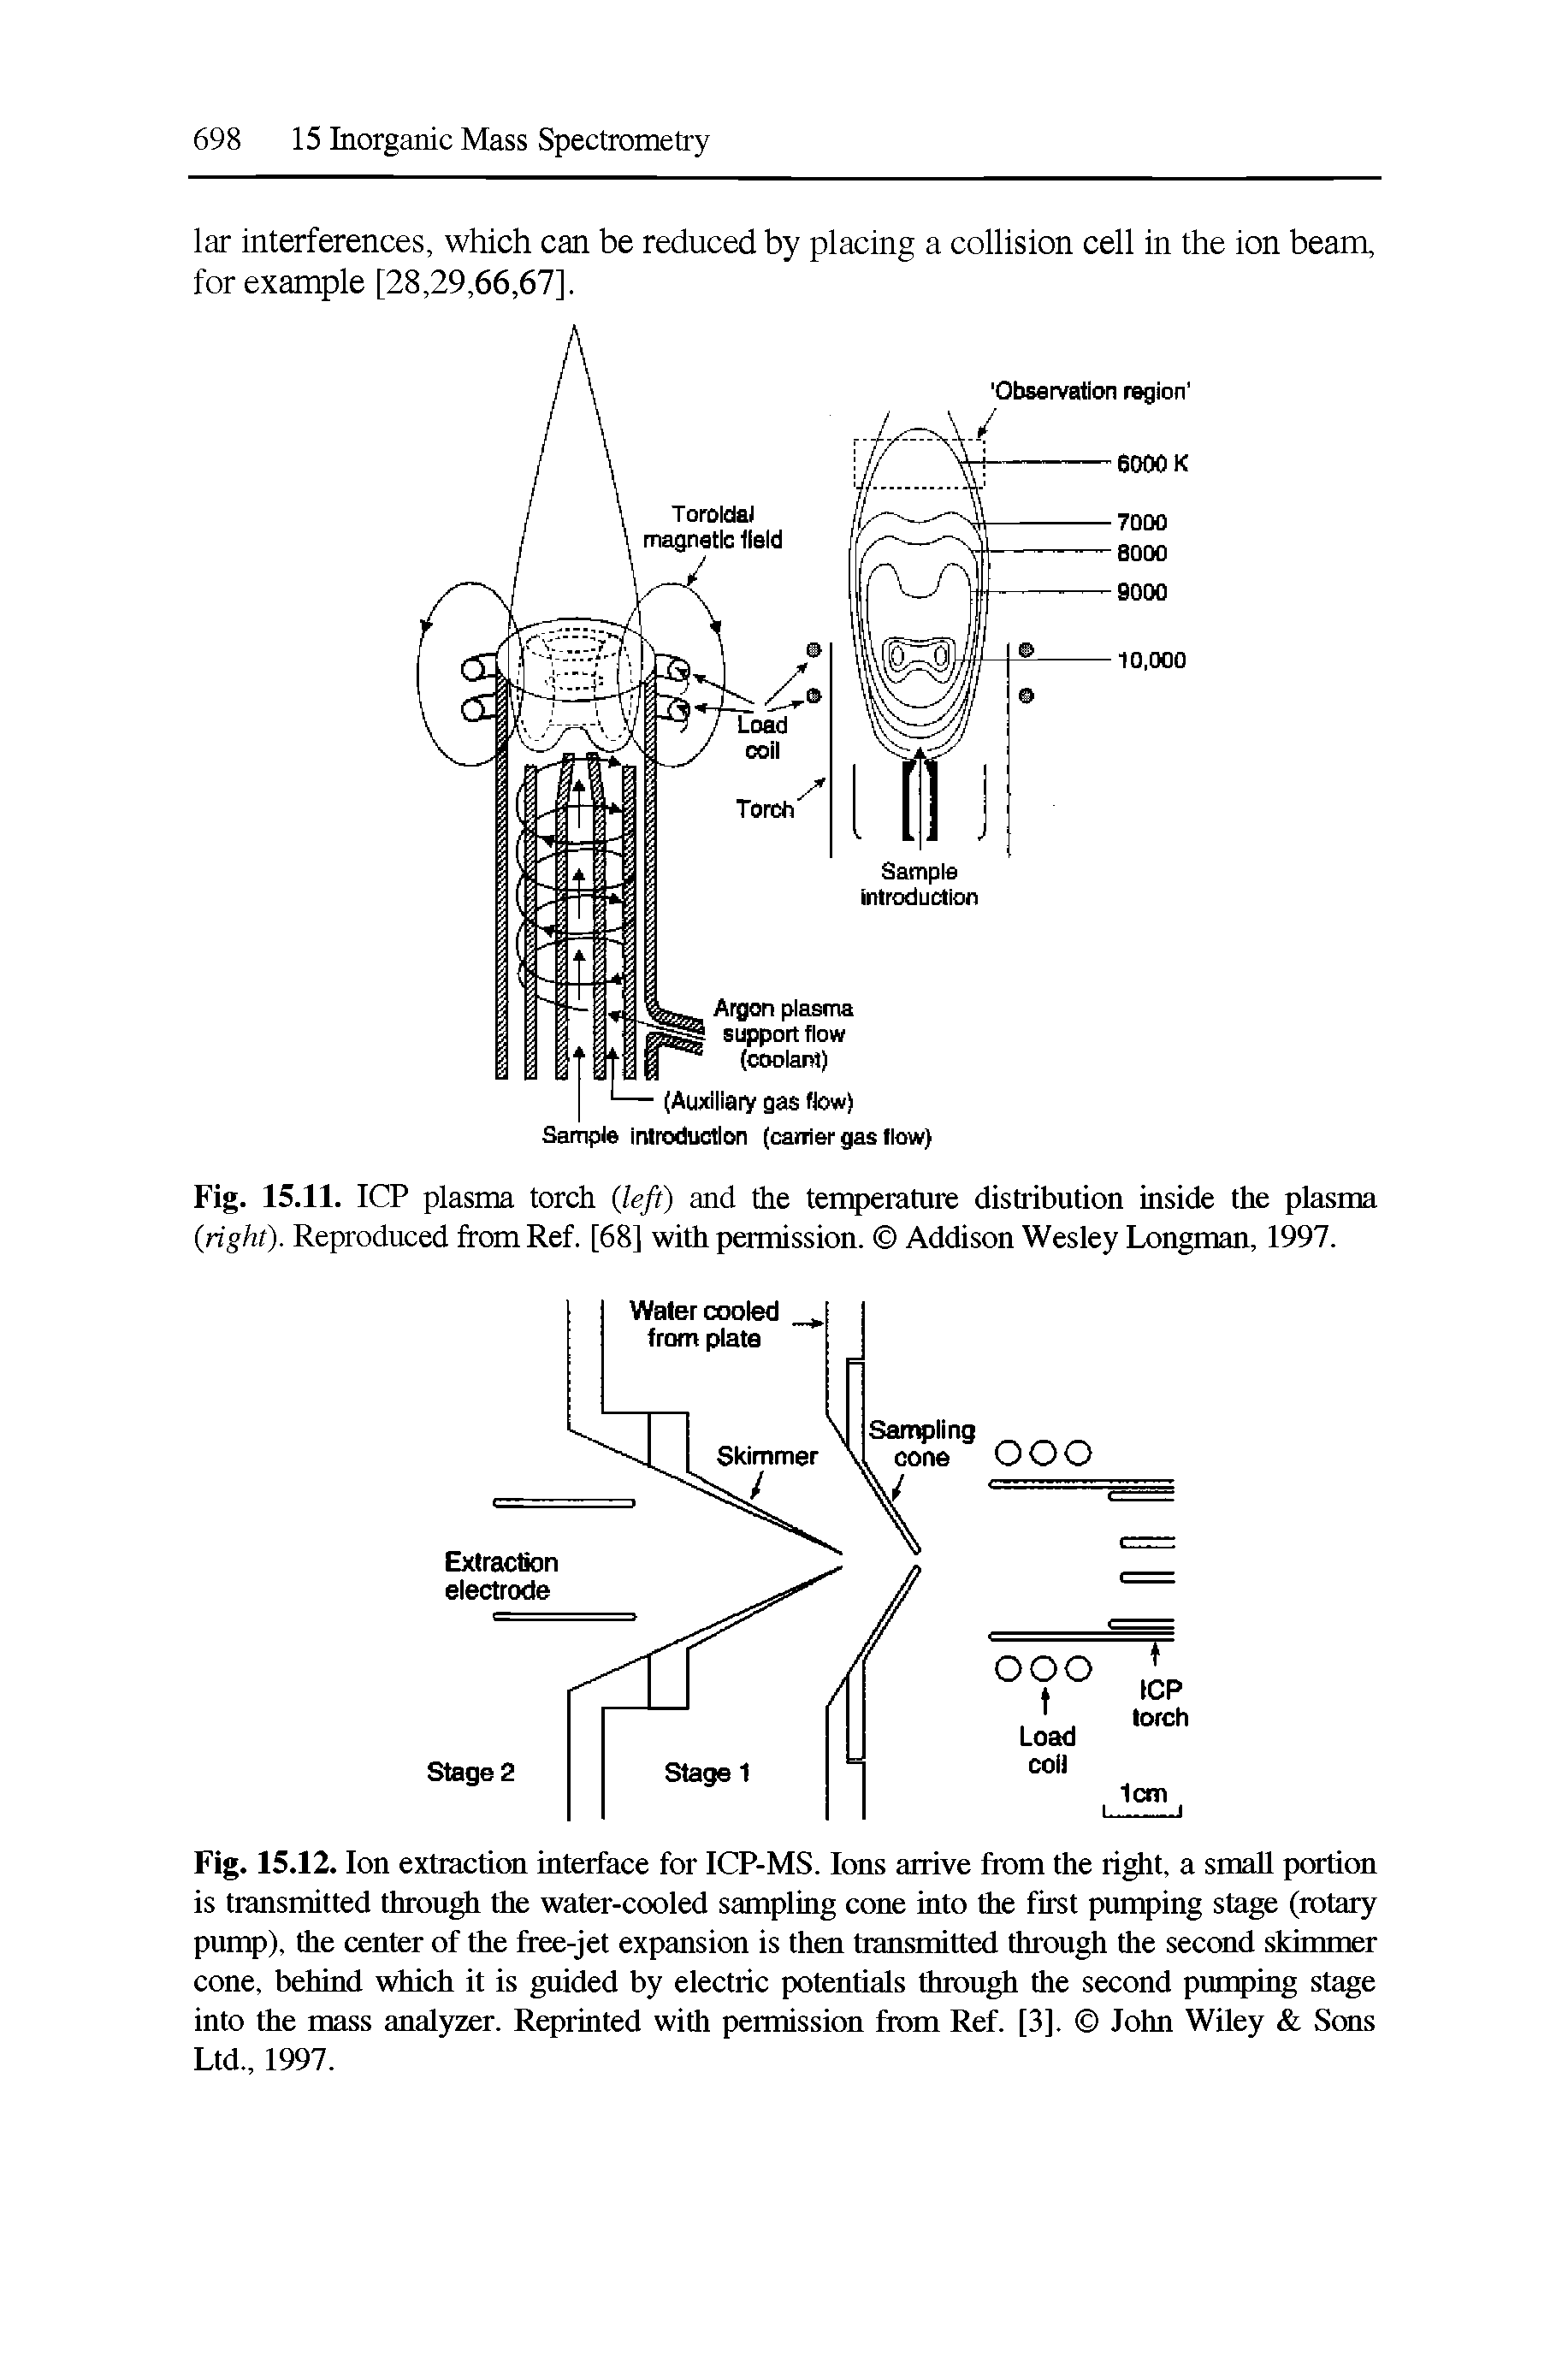 Fig. 15.12. Ion extraction interface for ICP-MS. Ions arrive from the ri t, a small portion is transmitted through the water-cooled sampling cone into the first pumping stage (rotary pump), the center of the free-jet expansion is then transmitted through the second skimmer cone, behind which it is guided by electric potentials through the second pumping stage into the mass analyzer. Reprinted with permission from Ref. [3]. John Wiley Sons Ltd., 1997.